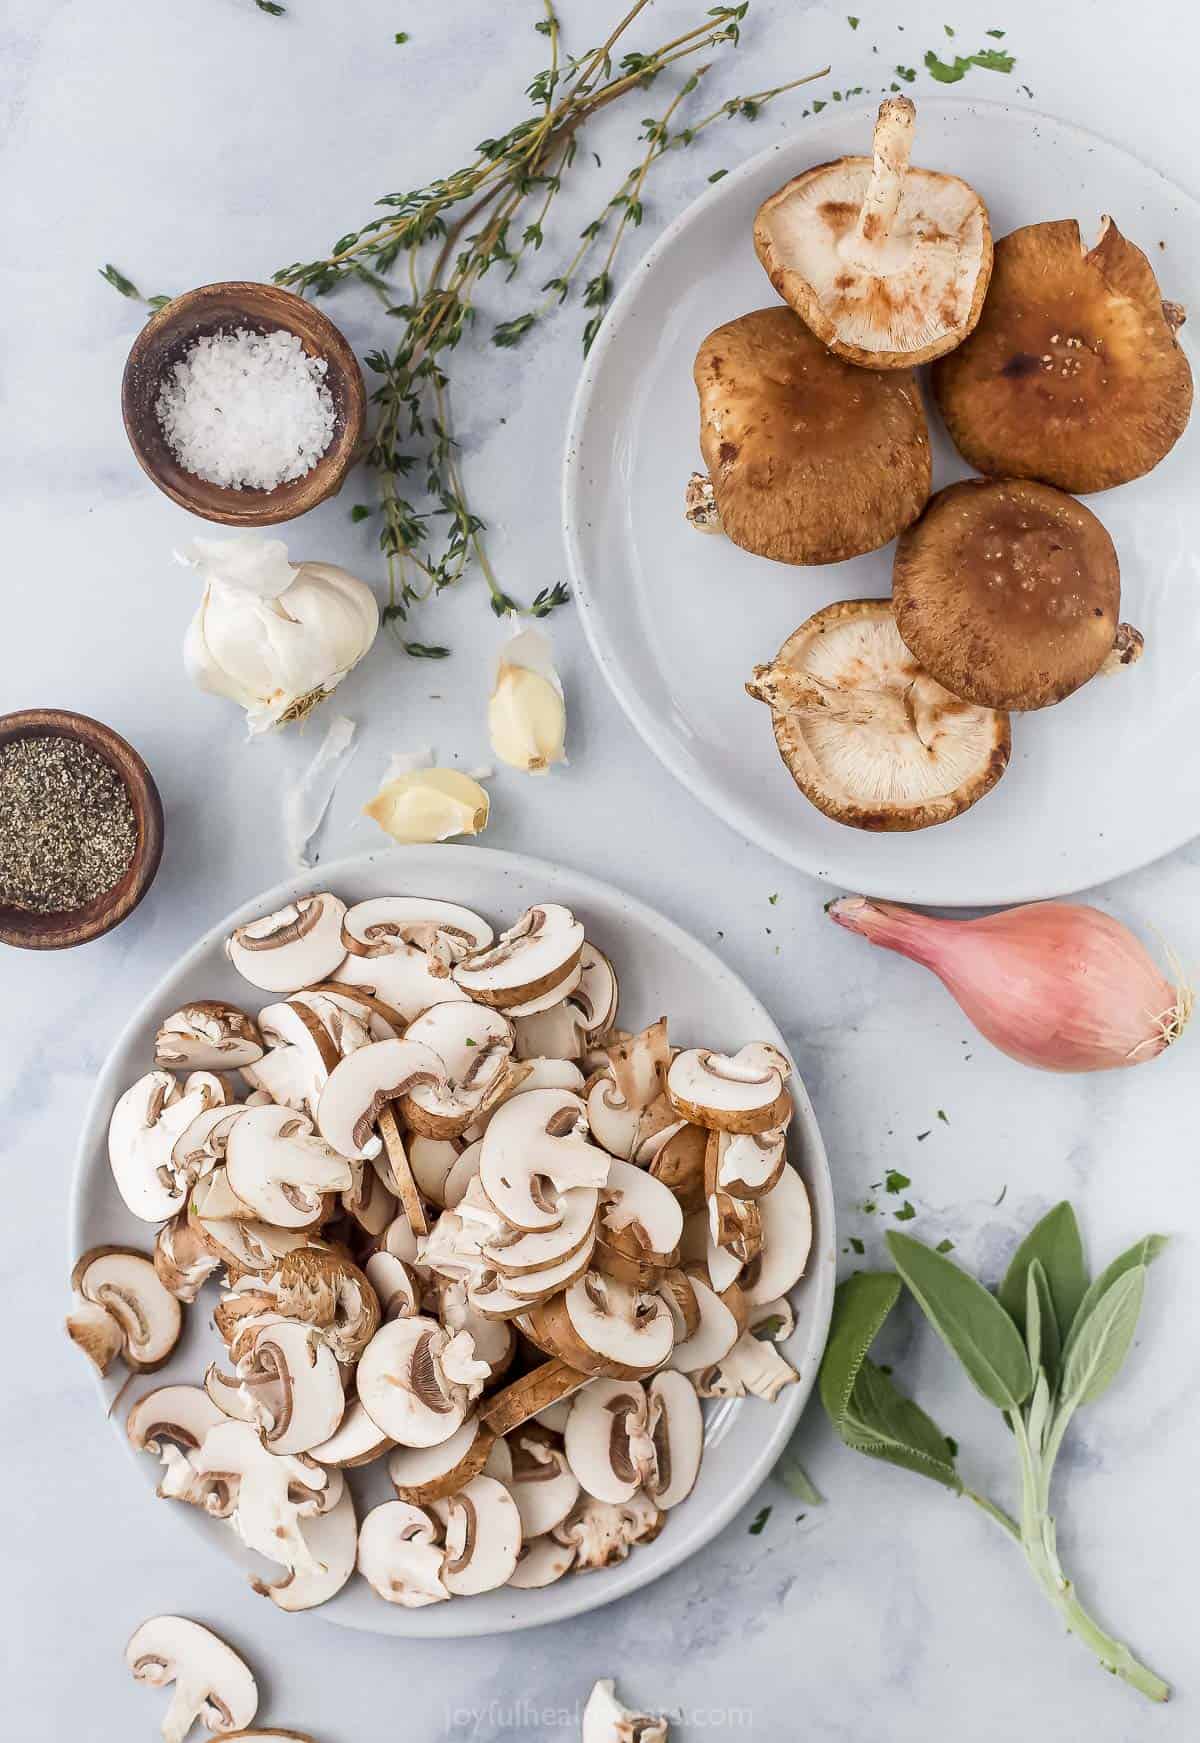 A plate of sliced mushrooms on a marble surface beside a plate of whole mushrooms and some loose garlic cloves